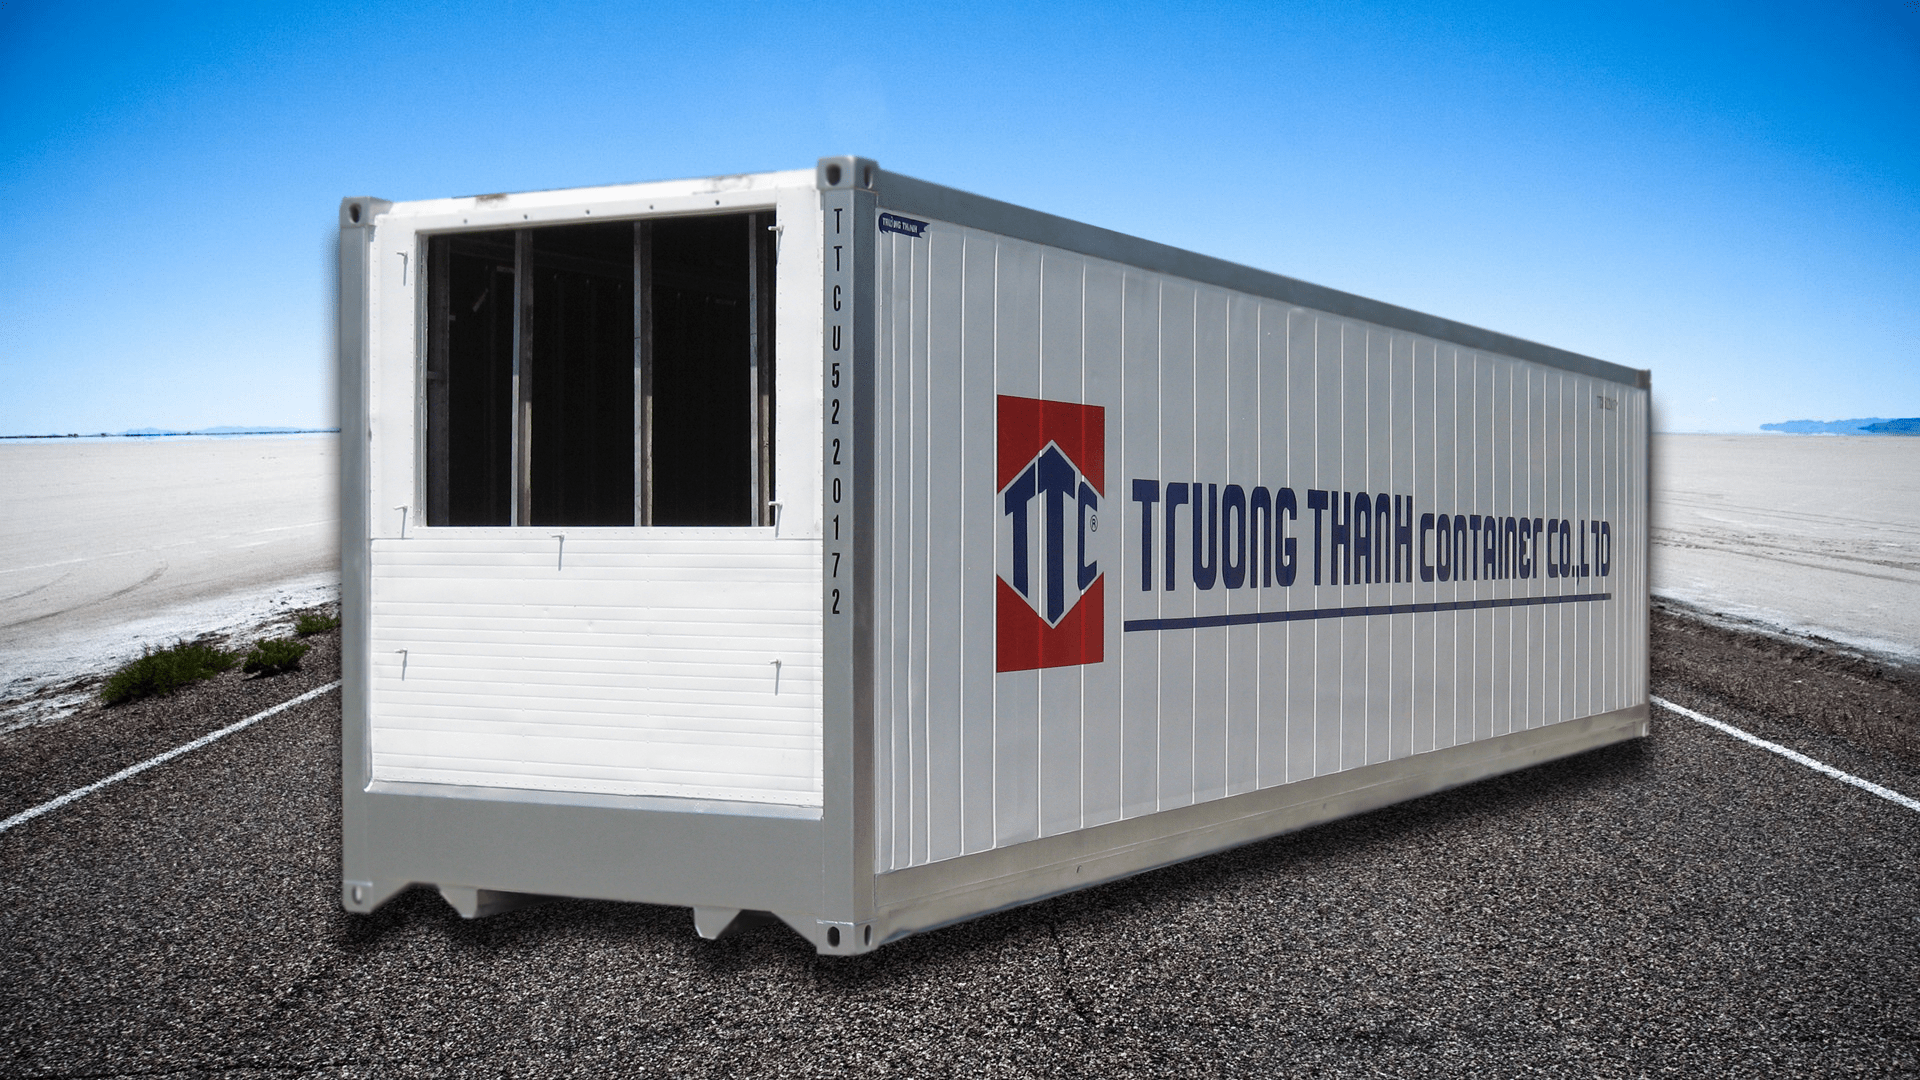 Trưởng Thanh Container